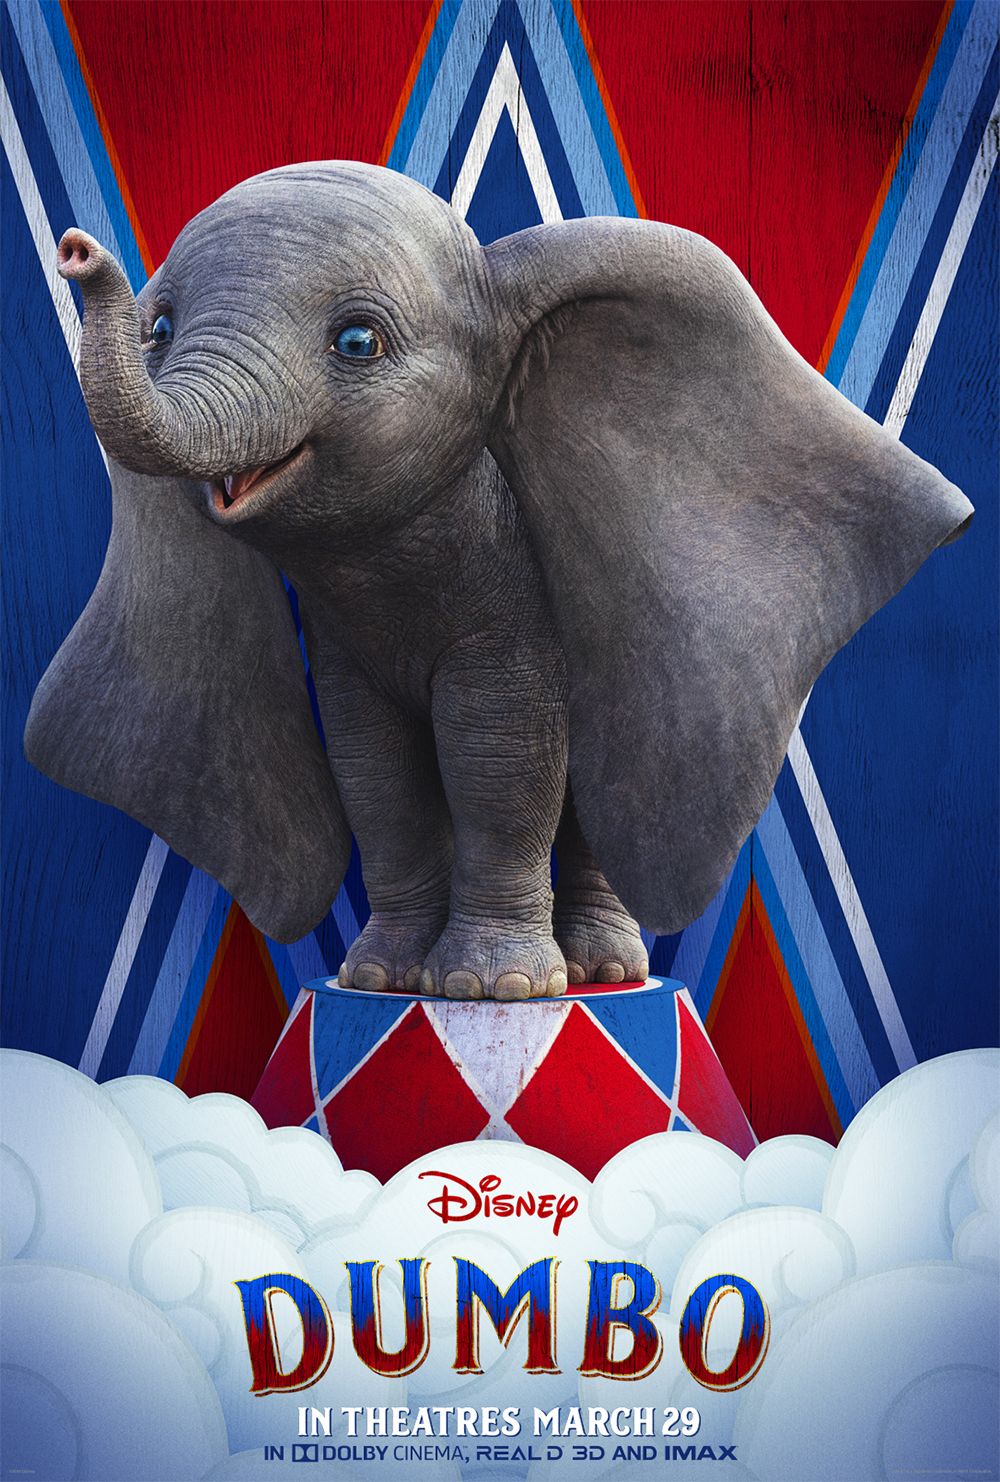 Another Sneak Peek and Posters Released for 'Dumbo'